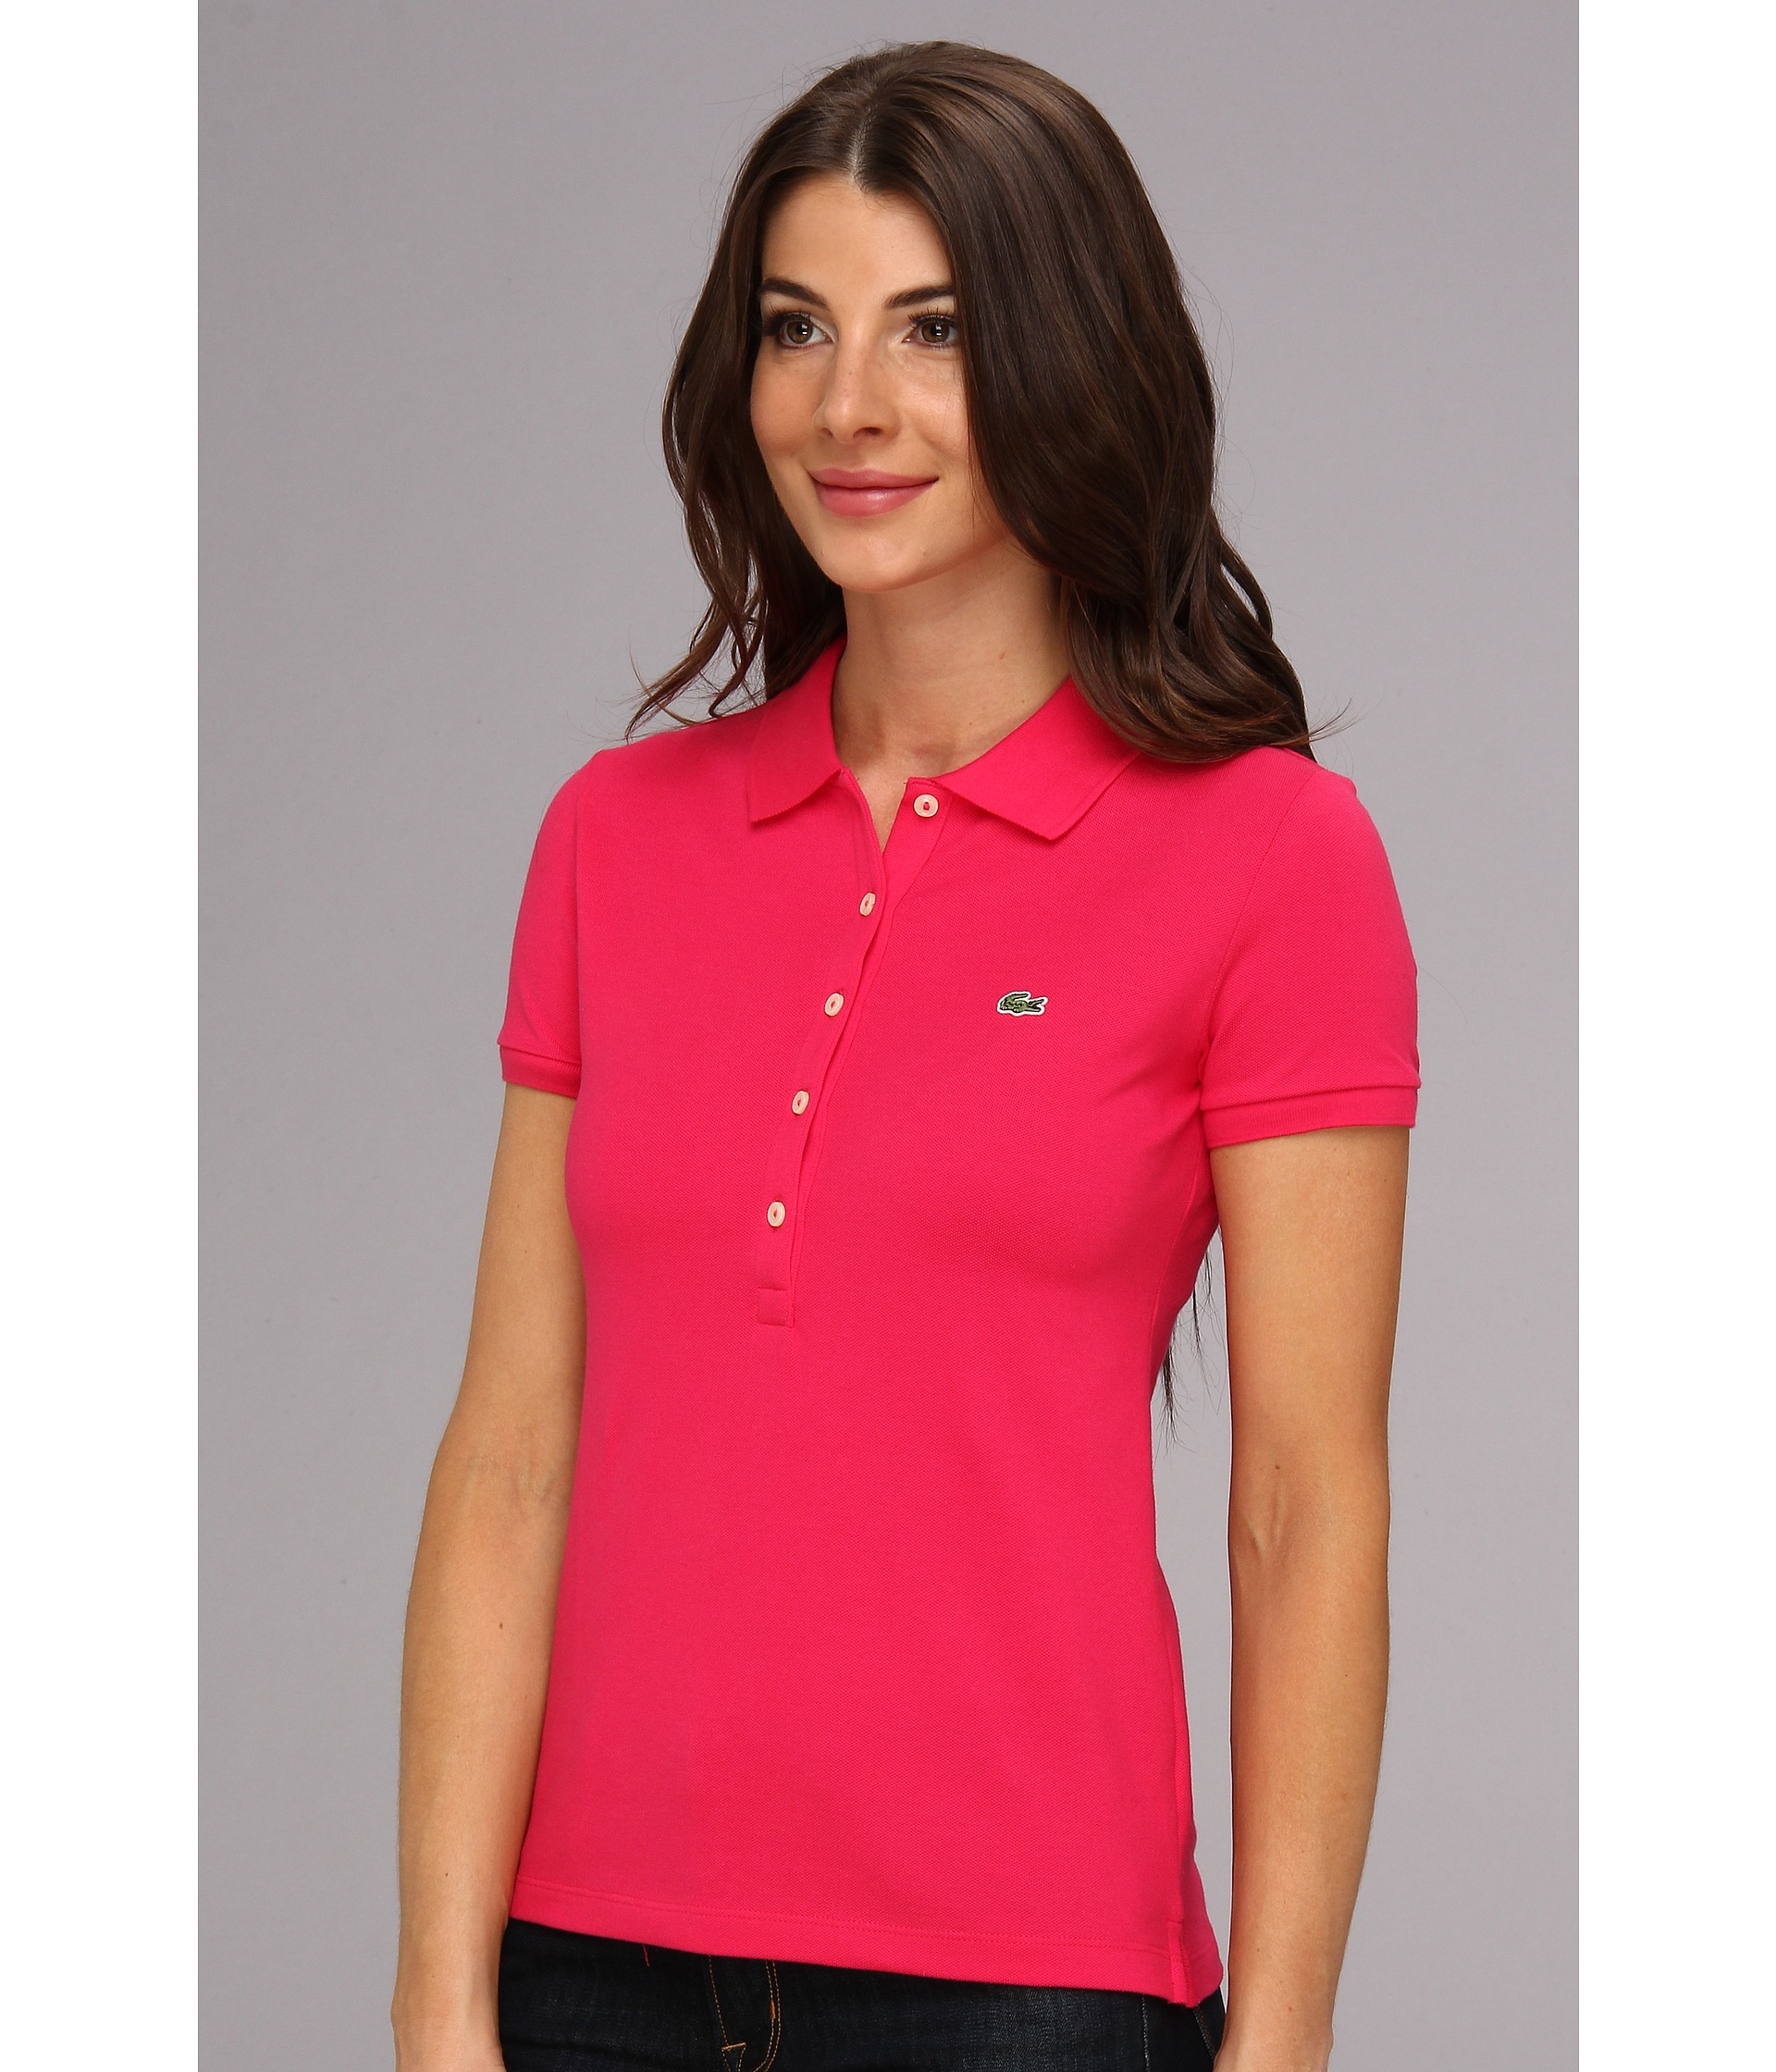 Lyst - Lacoste Ss 5 Button Stretch Pique Polo in Pink